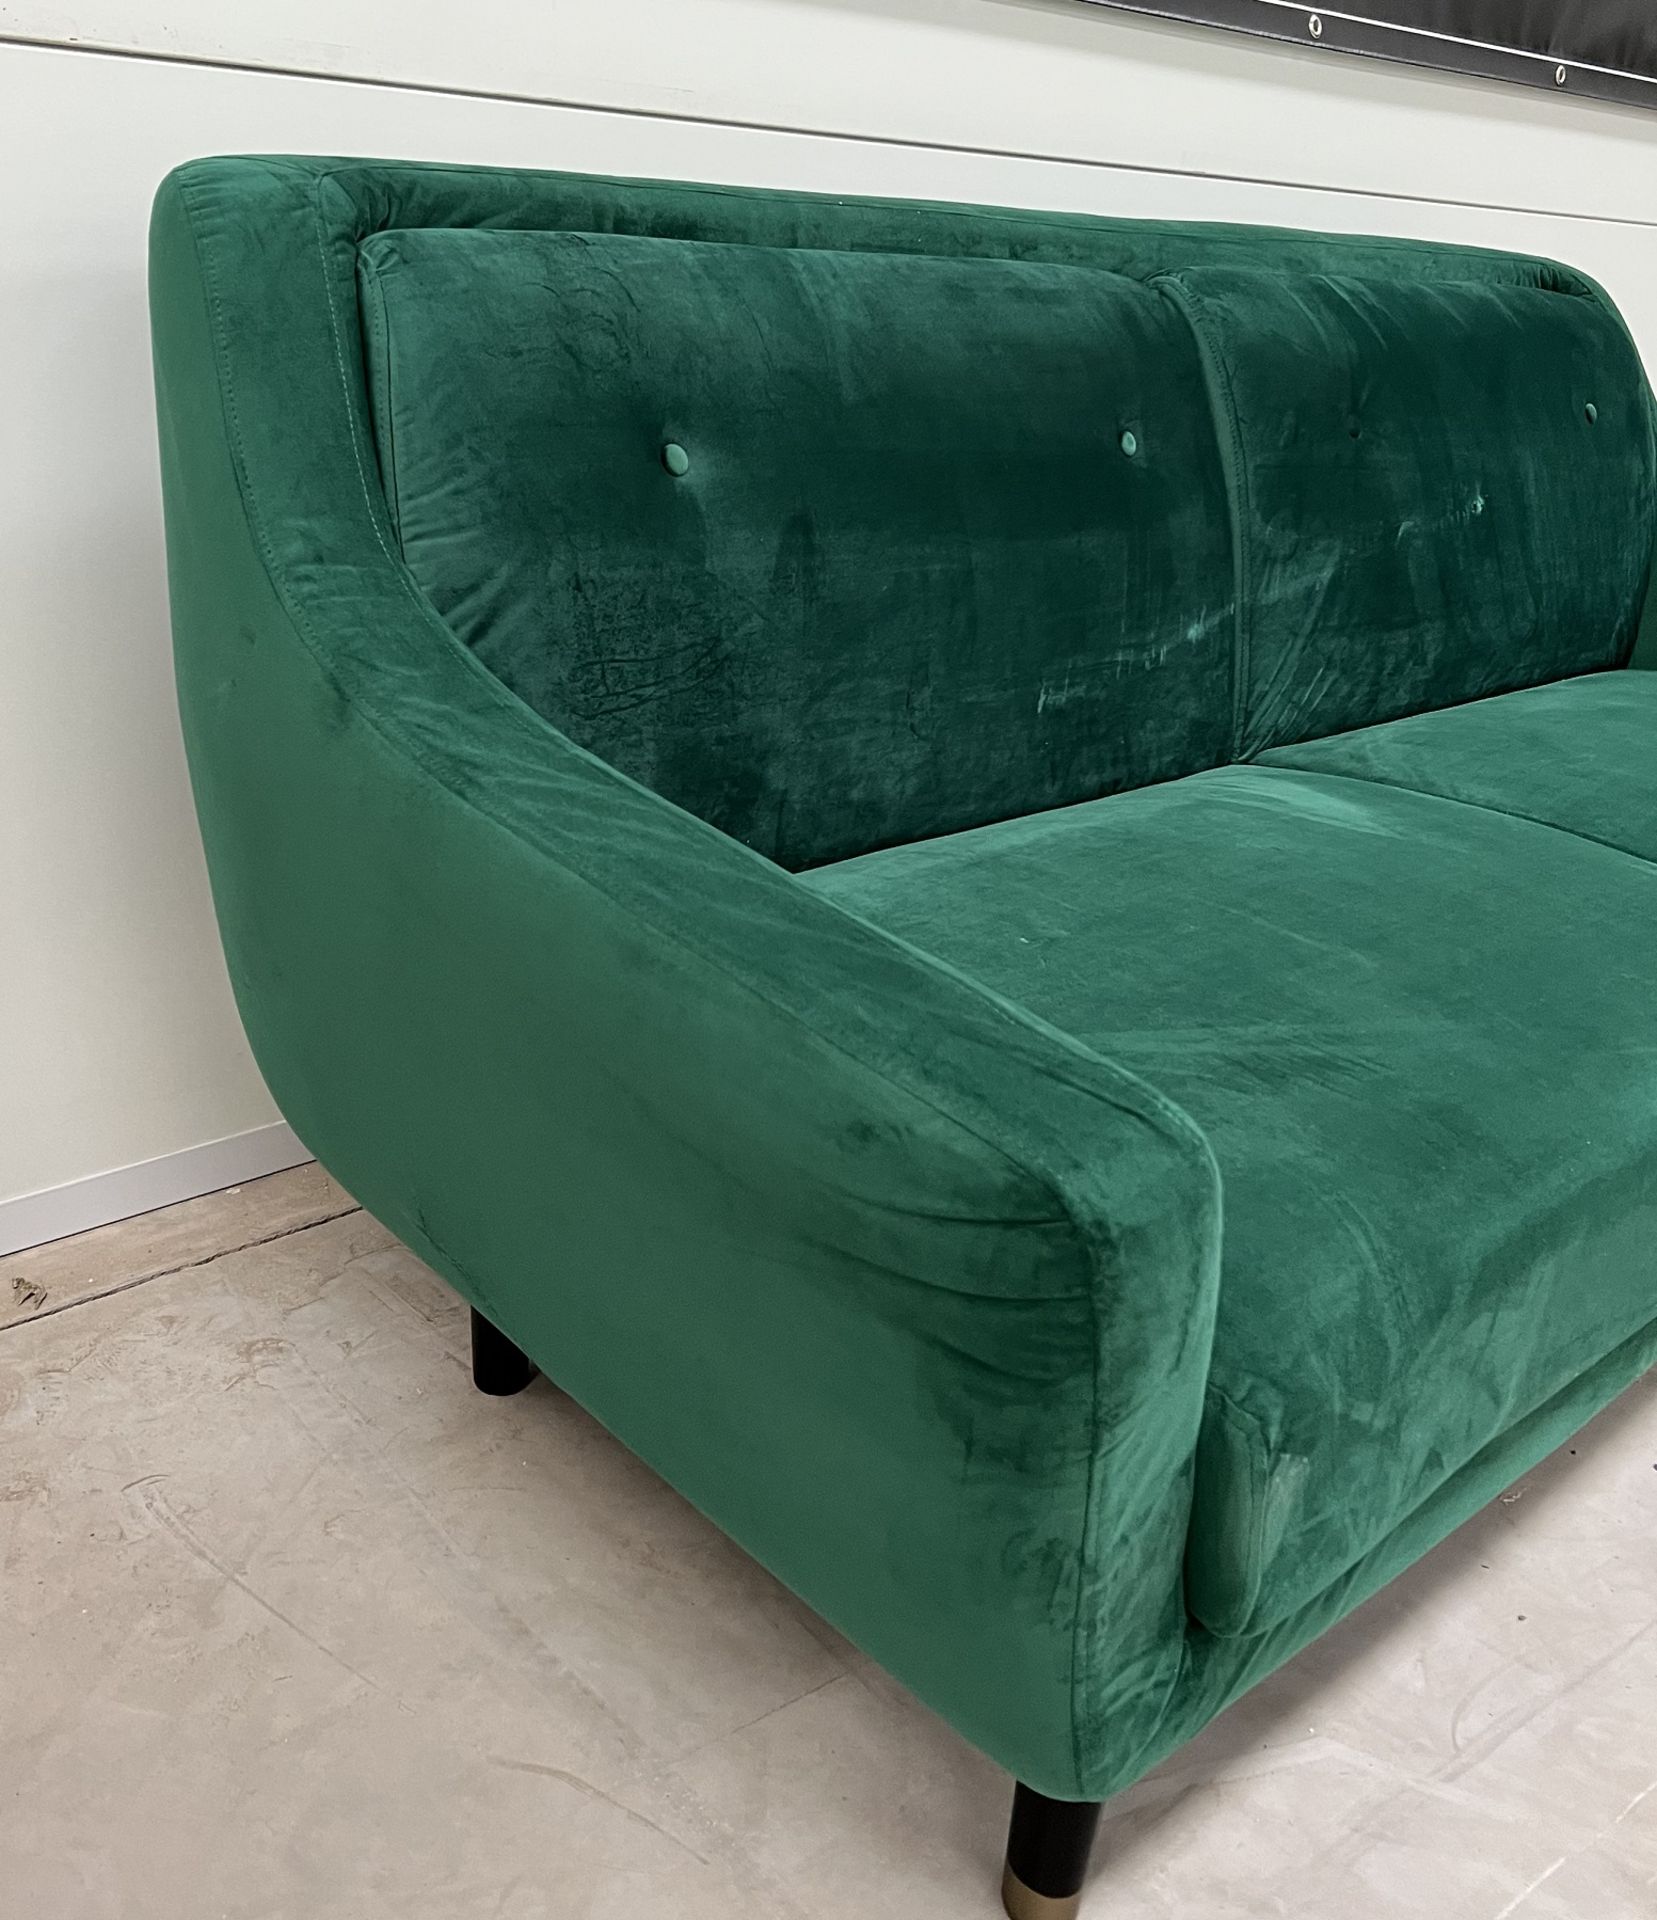 Lance Three Seater Sofa In Green Velvet Legs Finished In Black Legs This Welcoming Shape Is Hugged - Image 3 of 4